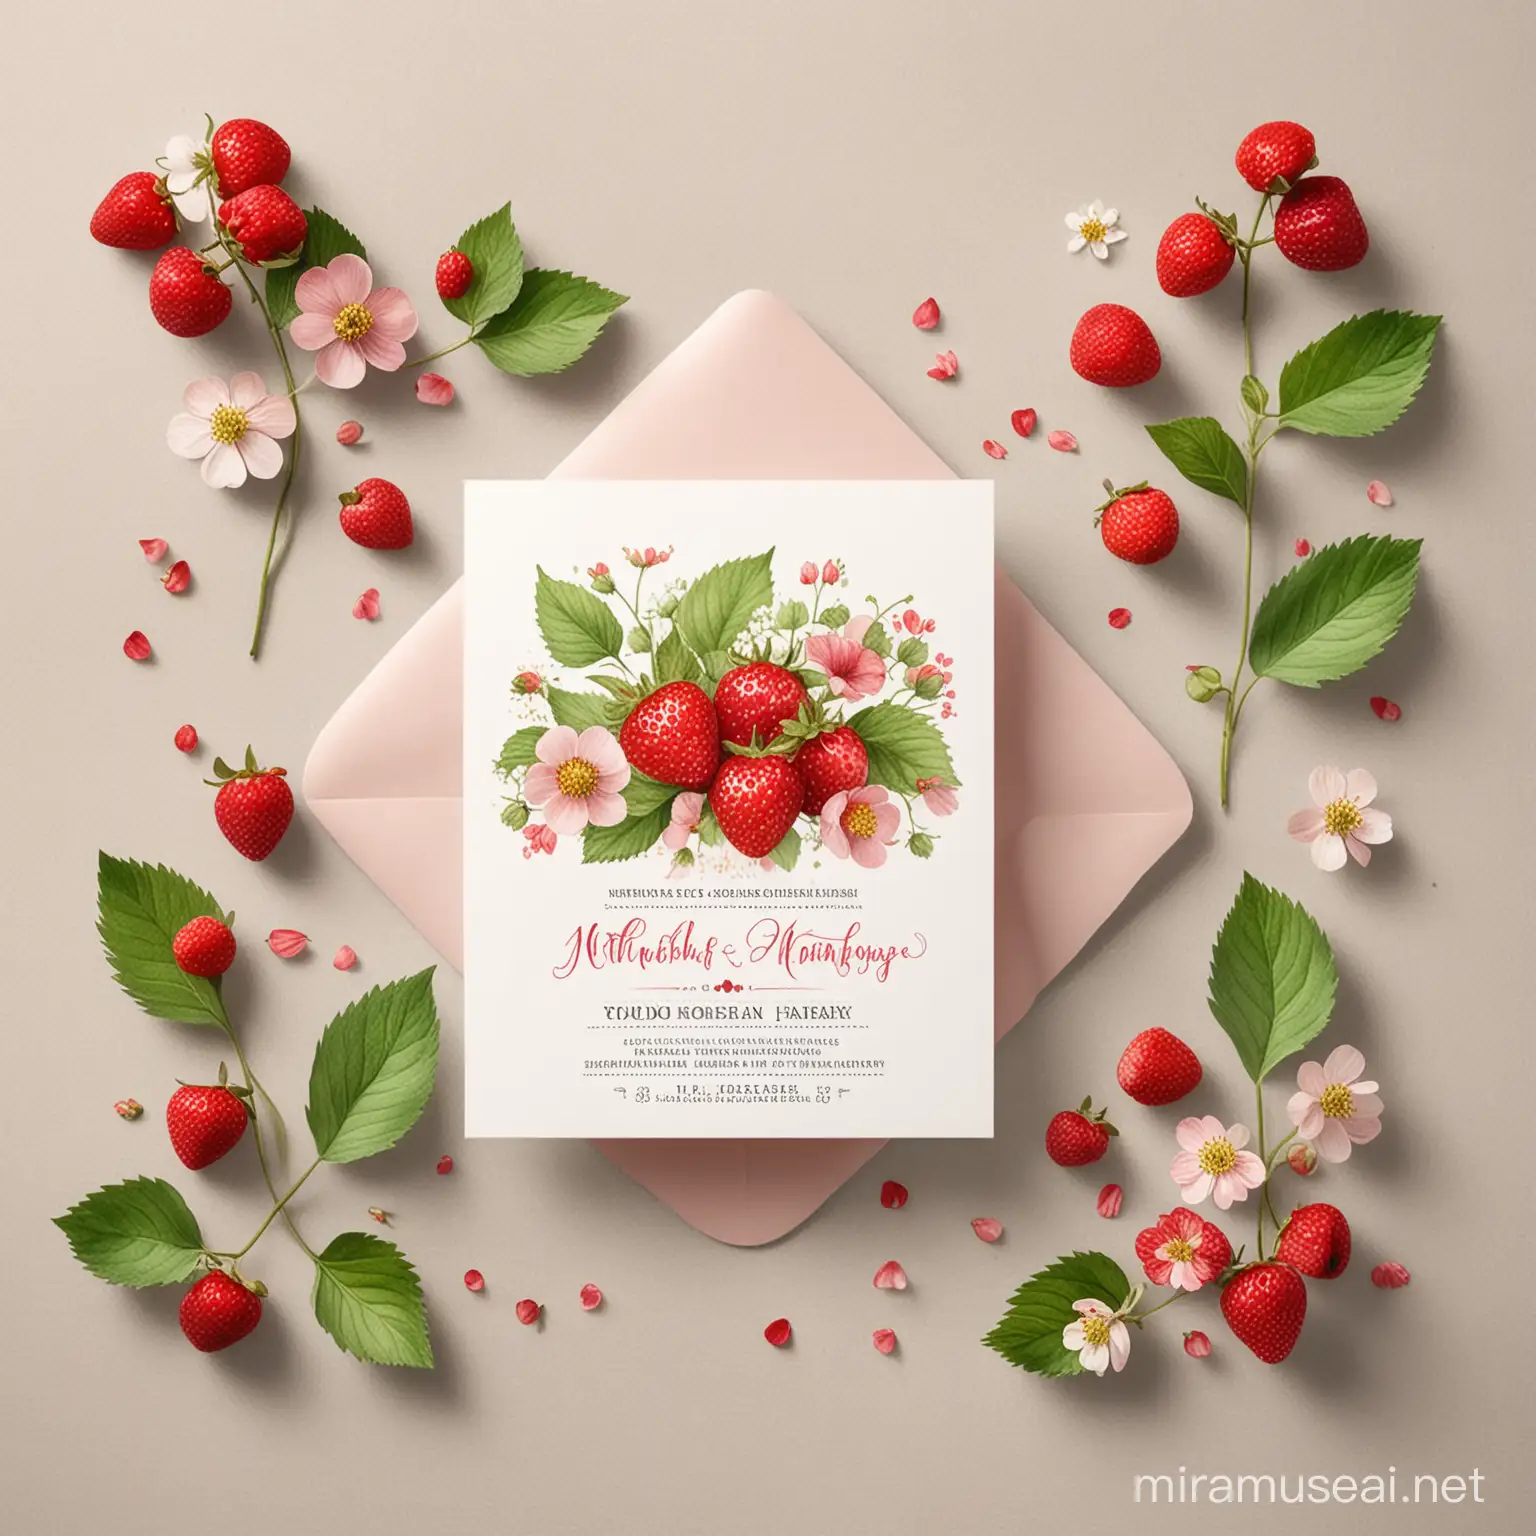 Watercolor Strawberry Invitation Mockup with Delicate Wild Strawberries and Petals